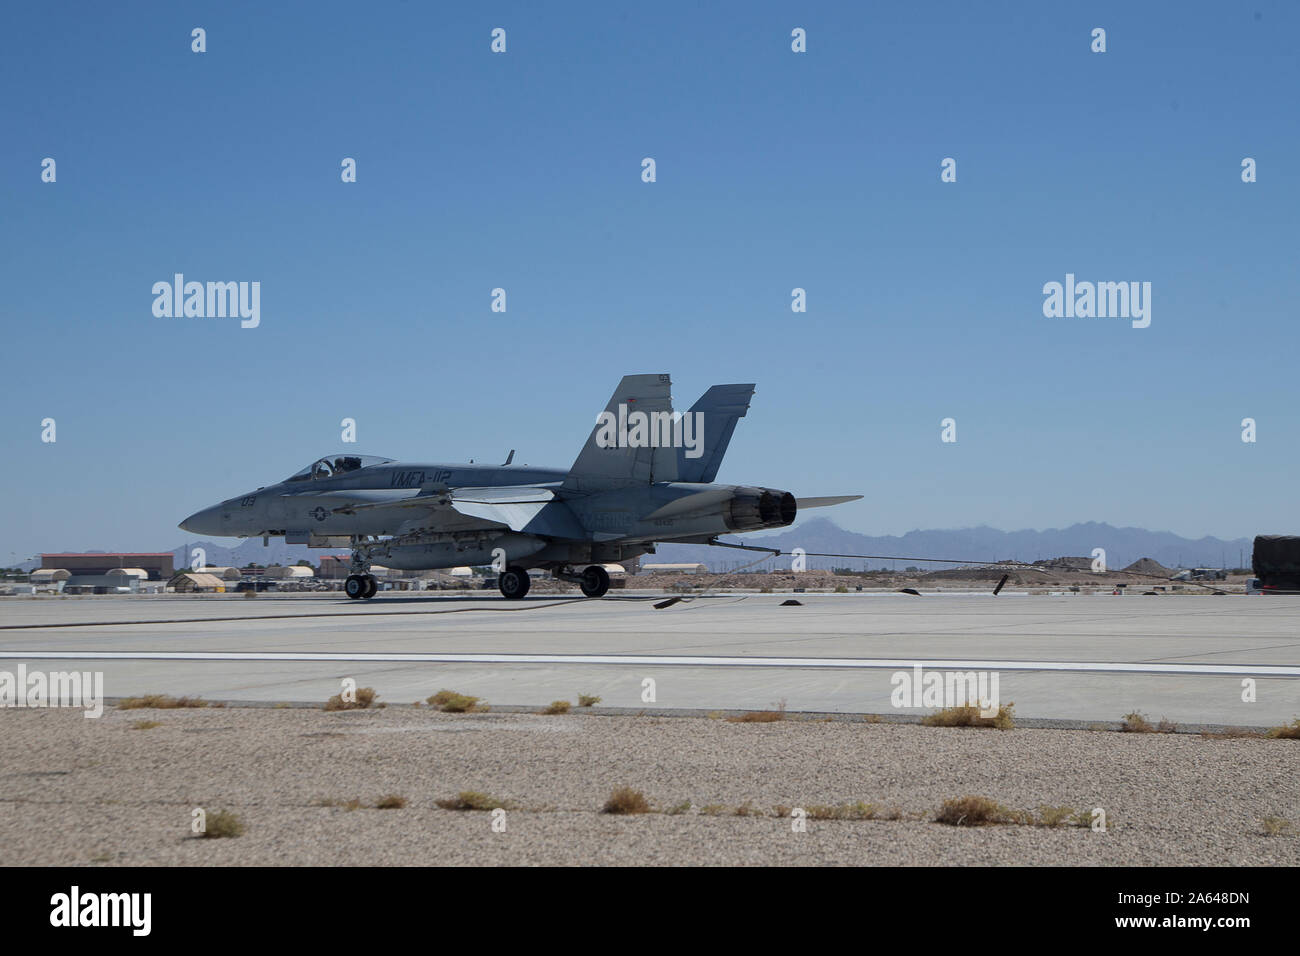 A U.S. Marine Corps F/A-18D Hornet aircraft assigned to Marine Aviation Weapons and Tactics Squadron One (MAWTS-1) conducts an arrested landing during Weapons and Tactics Instructor (WTI) course 1-20 at Marine Corps Air Station Yuma, Arizona, Sept. 30, 2019. WTI is a seven-week training event hosted by MAWTS-1, which emphasizes operational integration of the six functions of Marine Corps aviation in support of a Marine Air Ground Task Force. WTI provides standardized advanced tactical training and certification of unit instructor qualifications to support Marine aviation training and readiness Stock Photo